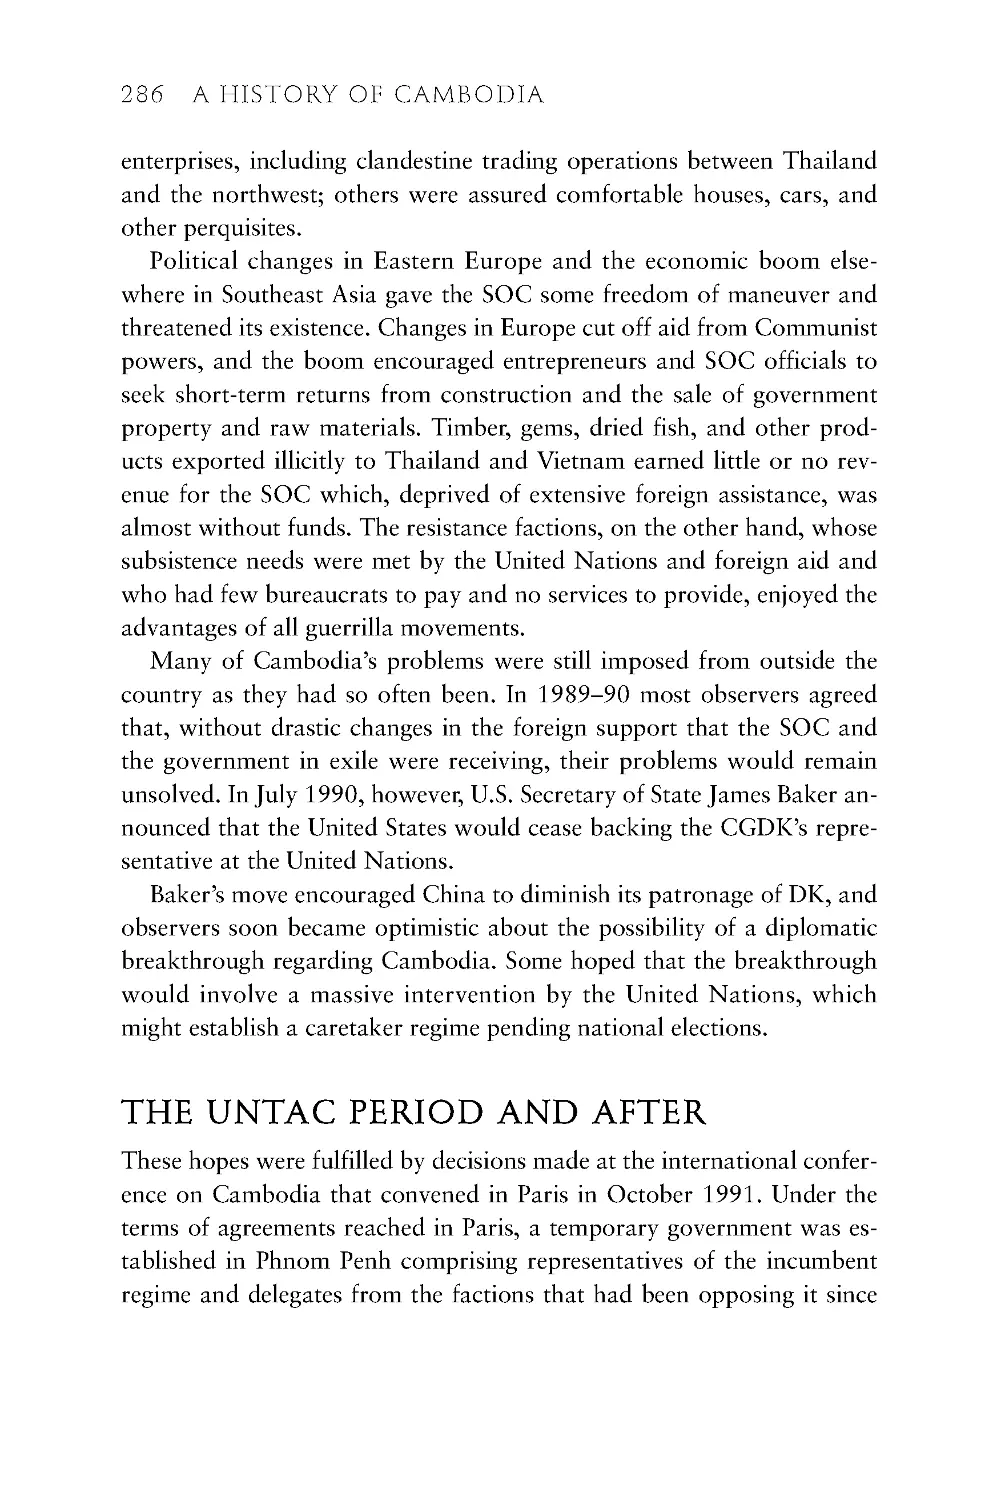 The UNTAC Period and After